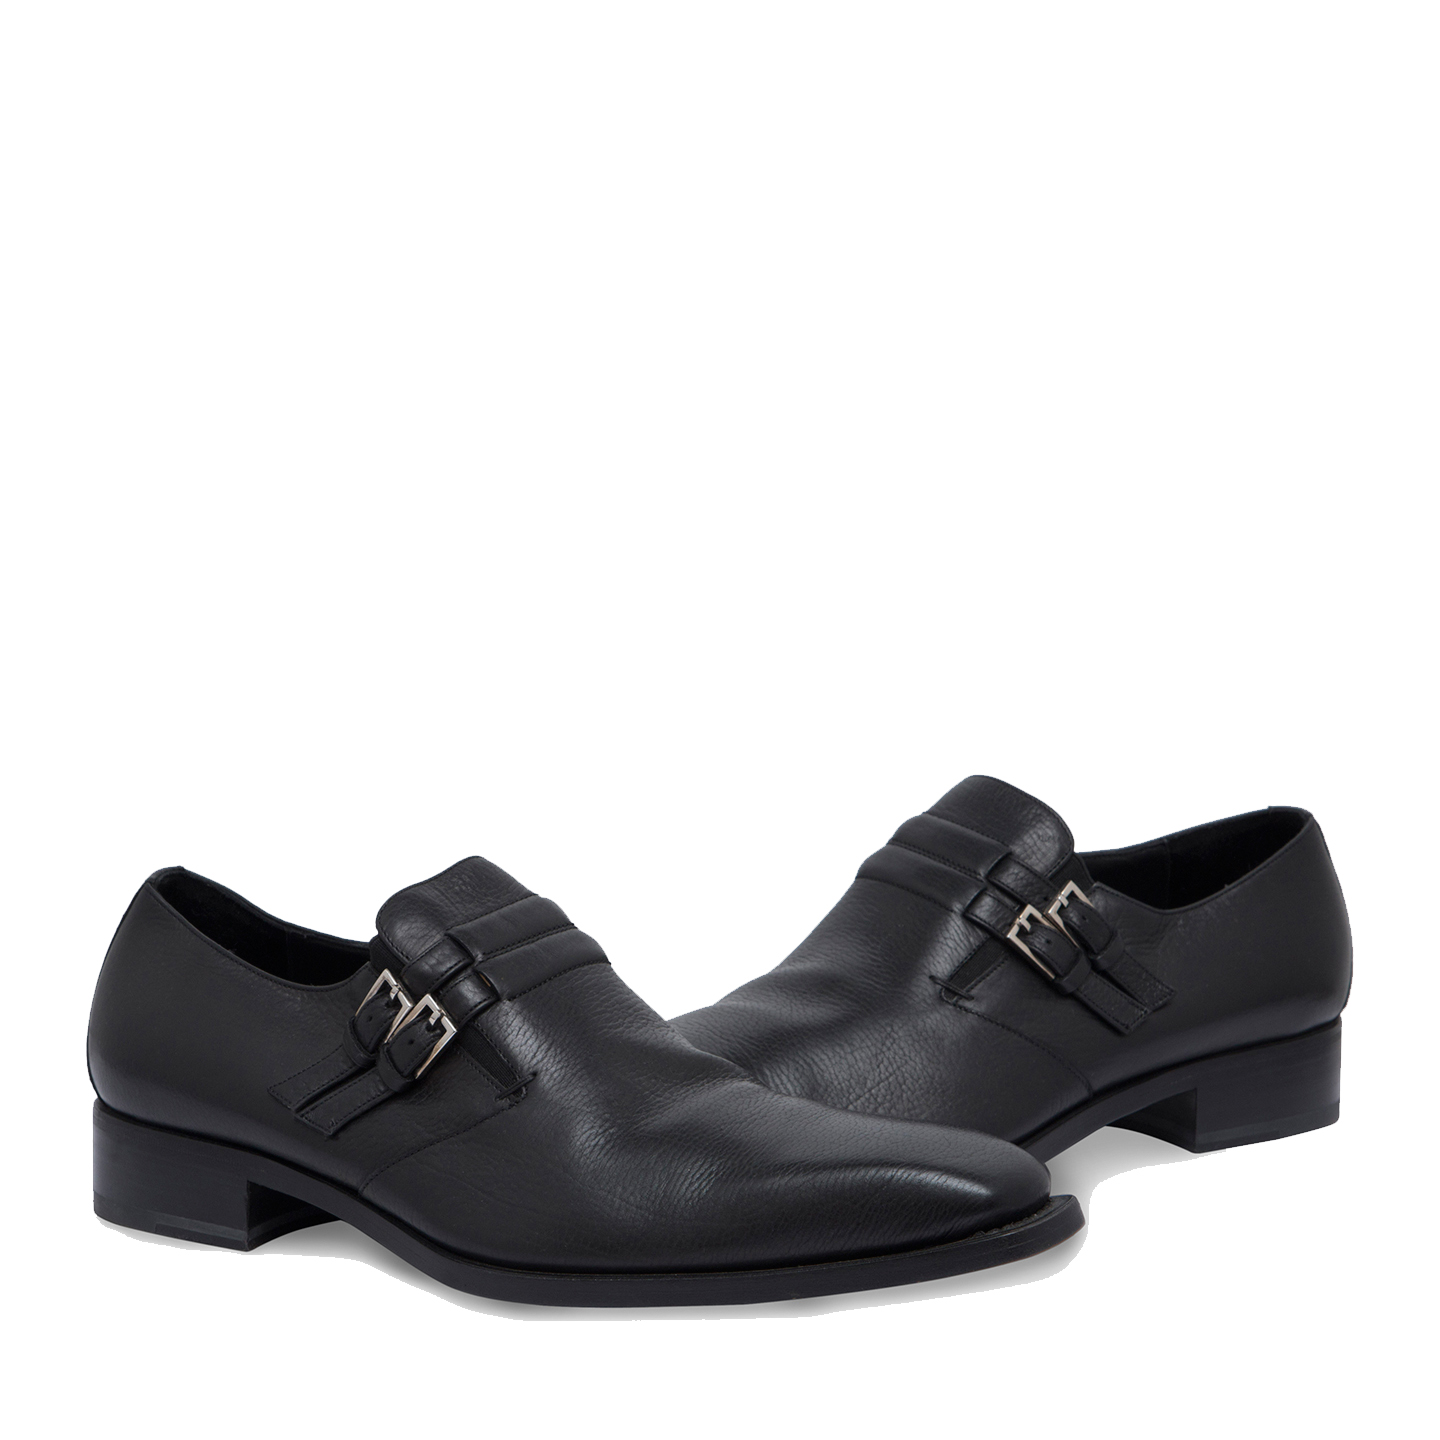 Gucci Leather Monk Strap Shoes Size 43E - LabelCentric